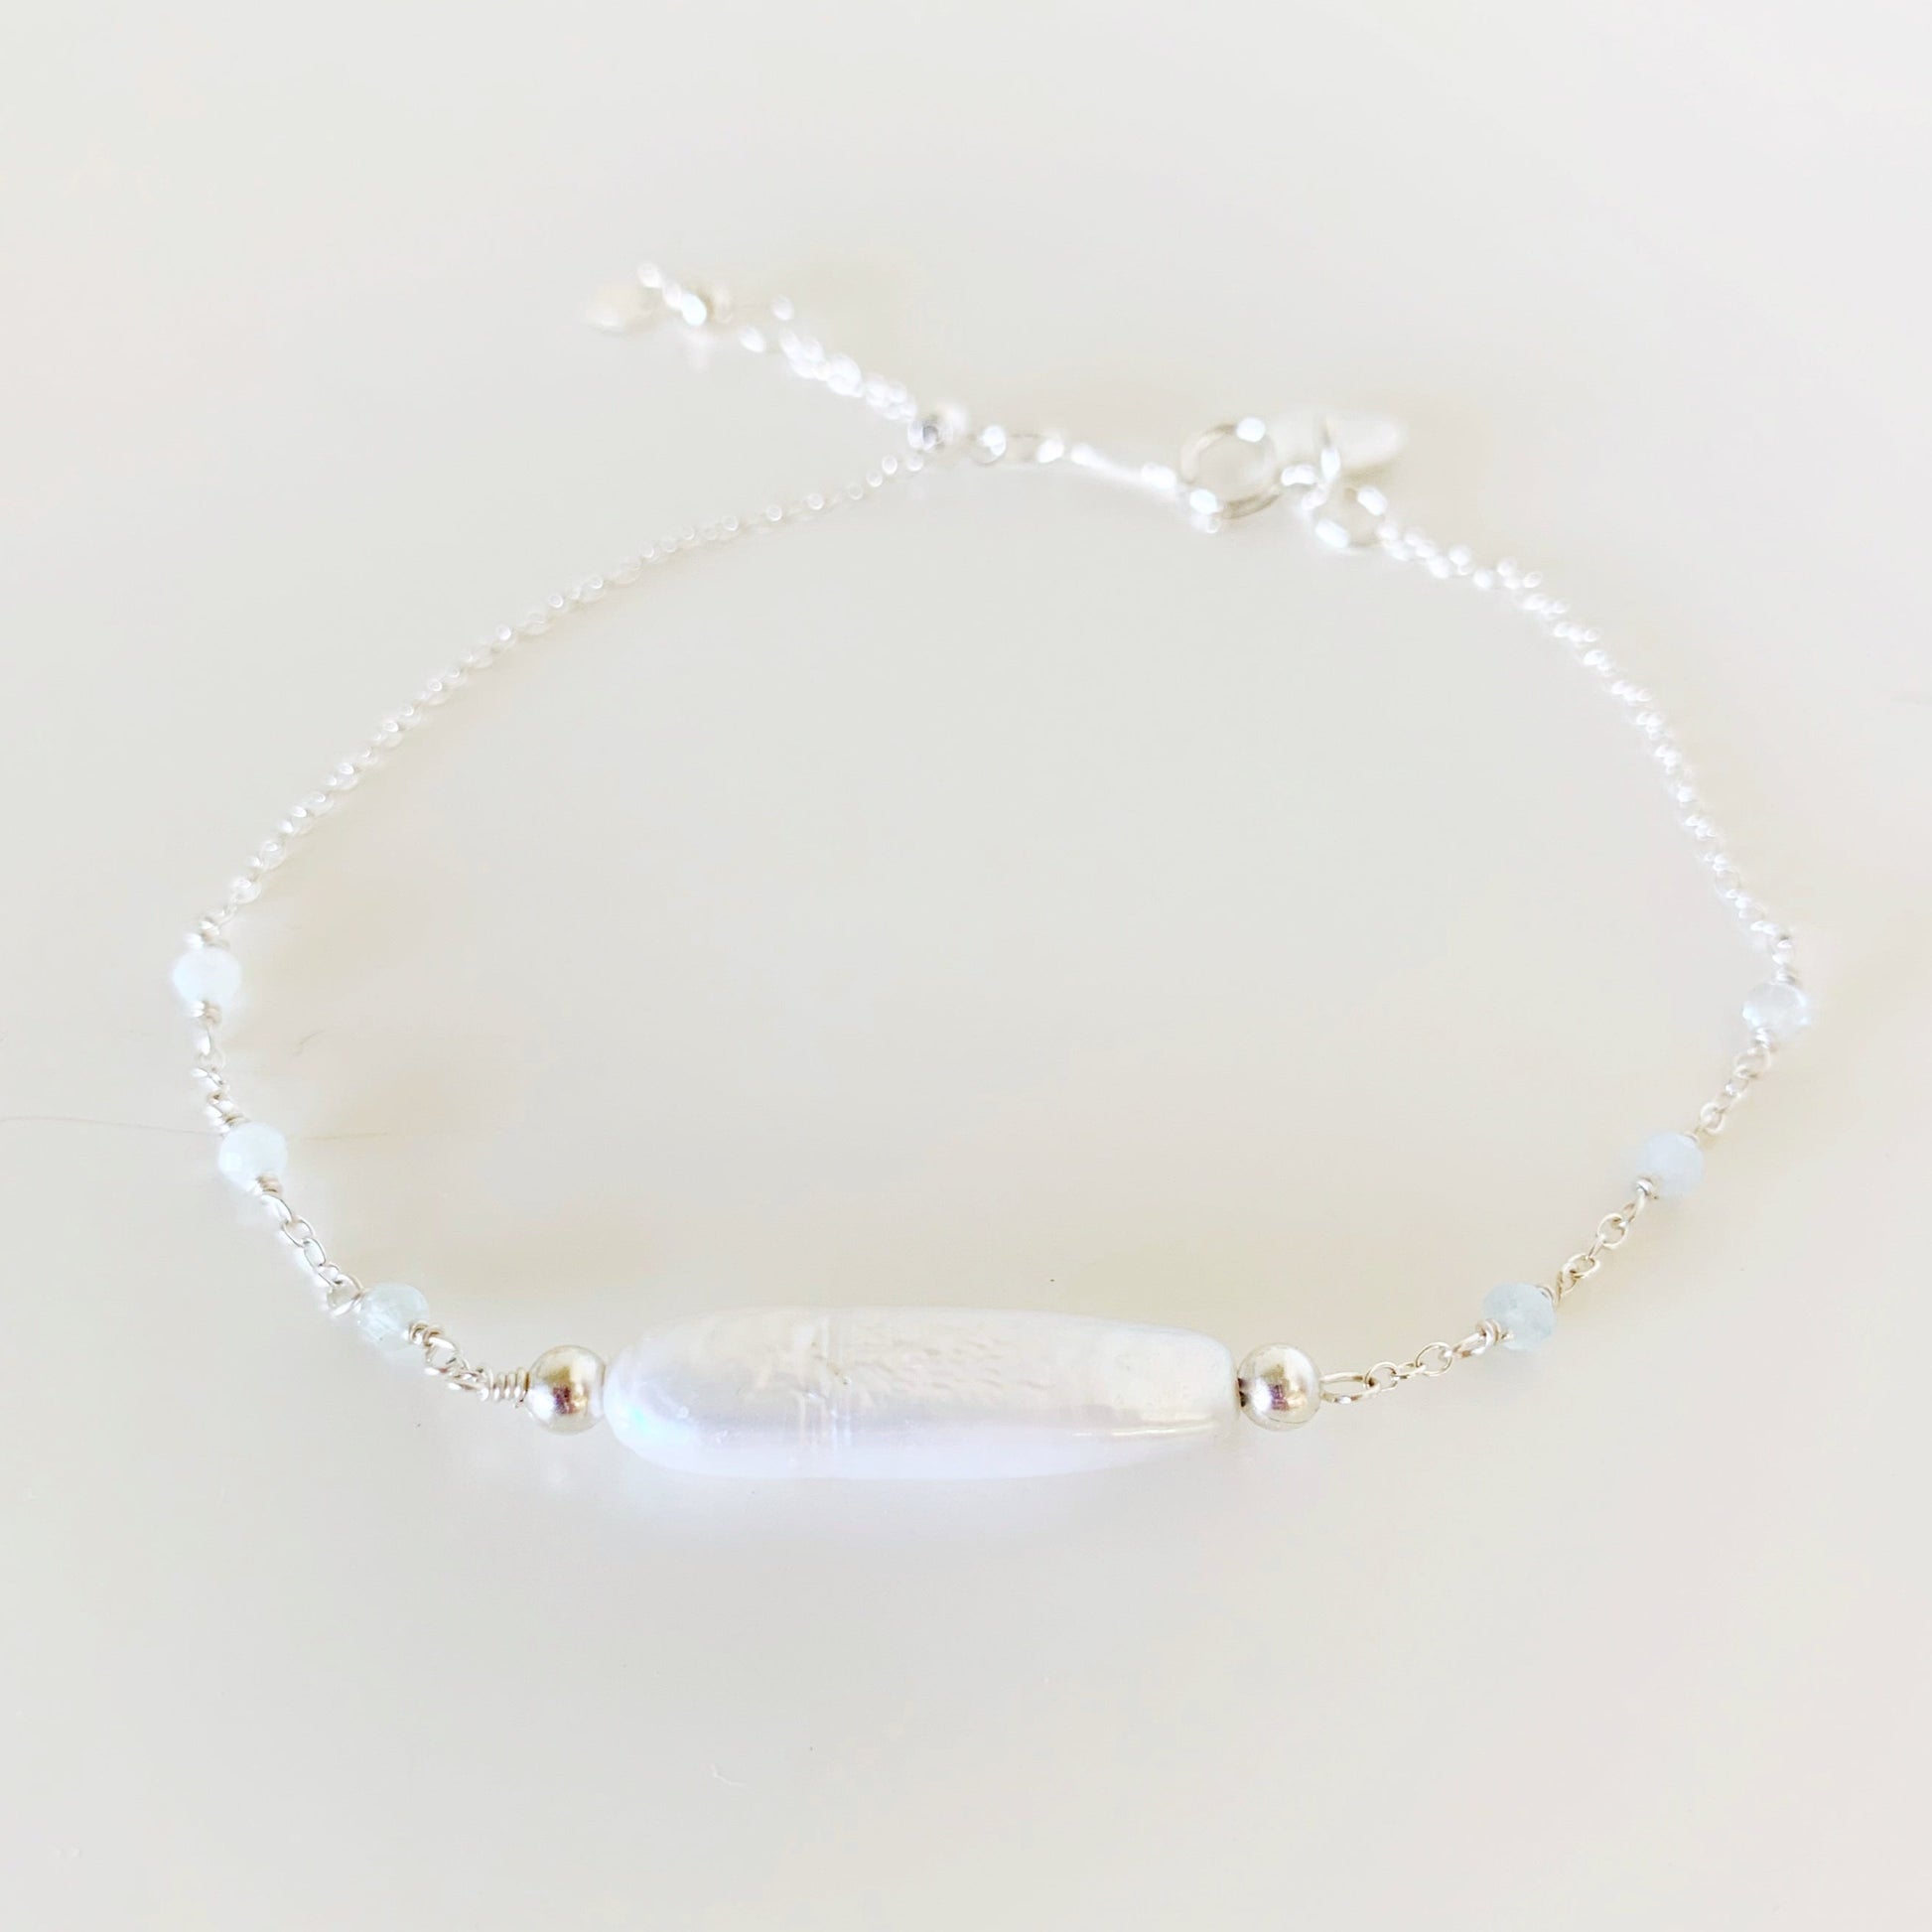 the truro bracelet by mermaids and madeleines is a sterling silver chain based adjustable bracelet with a freshwater stick pearl at the center. there are microfaceted aquamarine gems wired into the chain on either side and there's a slide bead near the clasp to tighten the bracelet. this piece is photographed from the front on a white surface